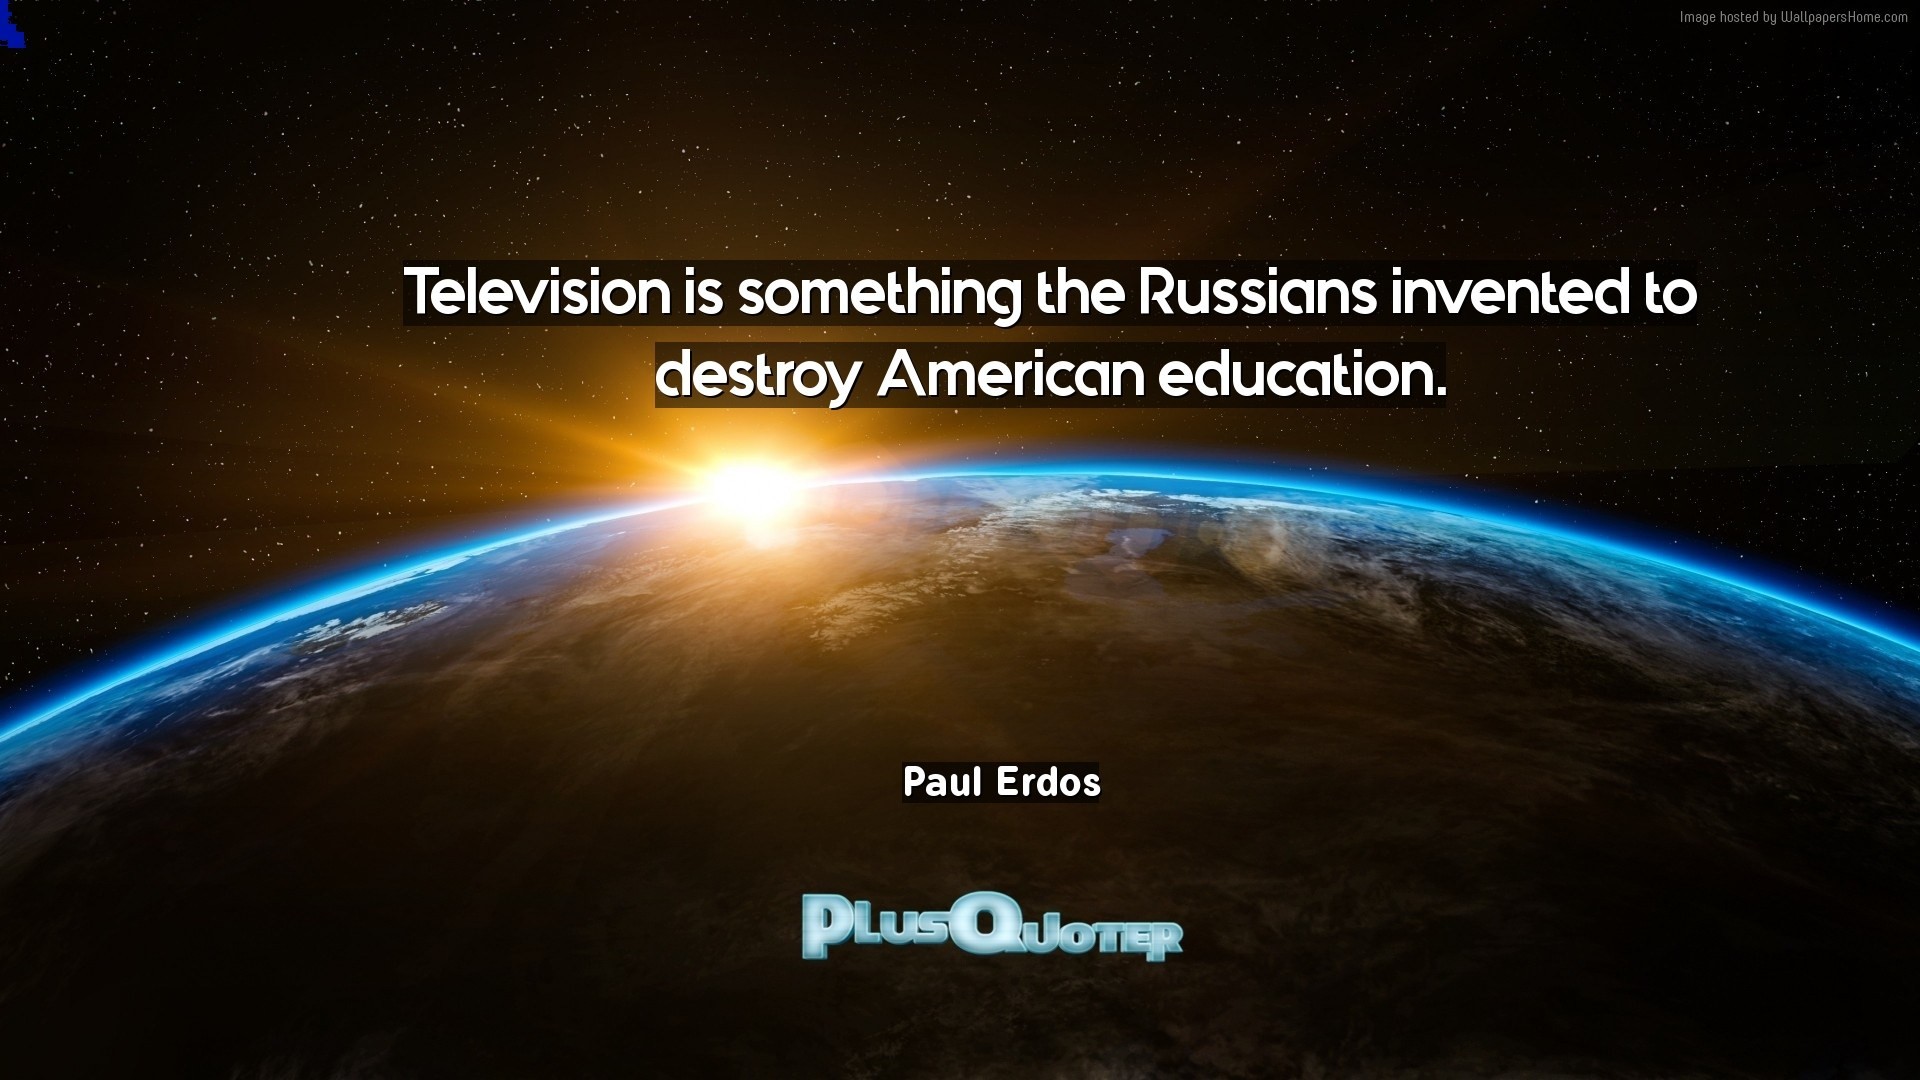 1920x1080 Download Wallpaper with inspirational Quotes- "Television is something the  Russians invented to destroy American